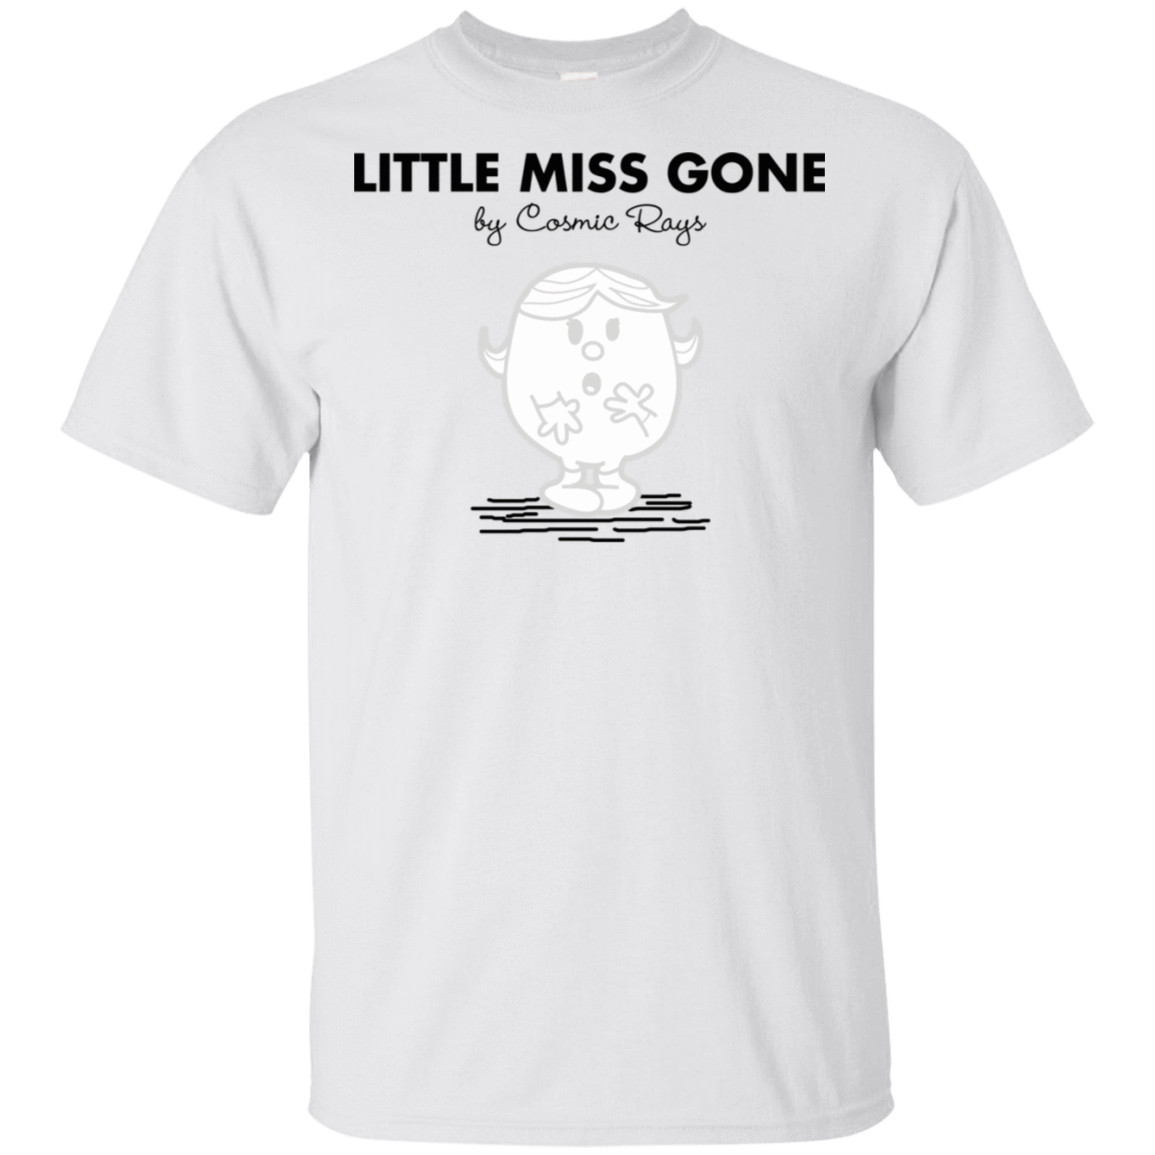 T-Shirts White / S Little Miss Gone T-Shirt